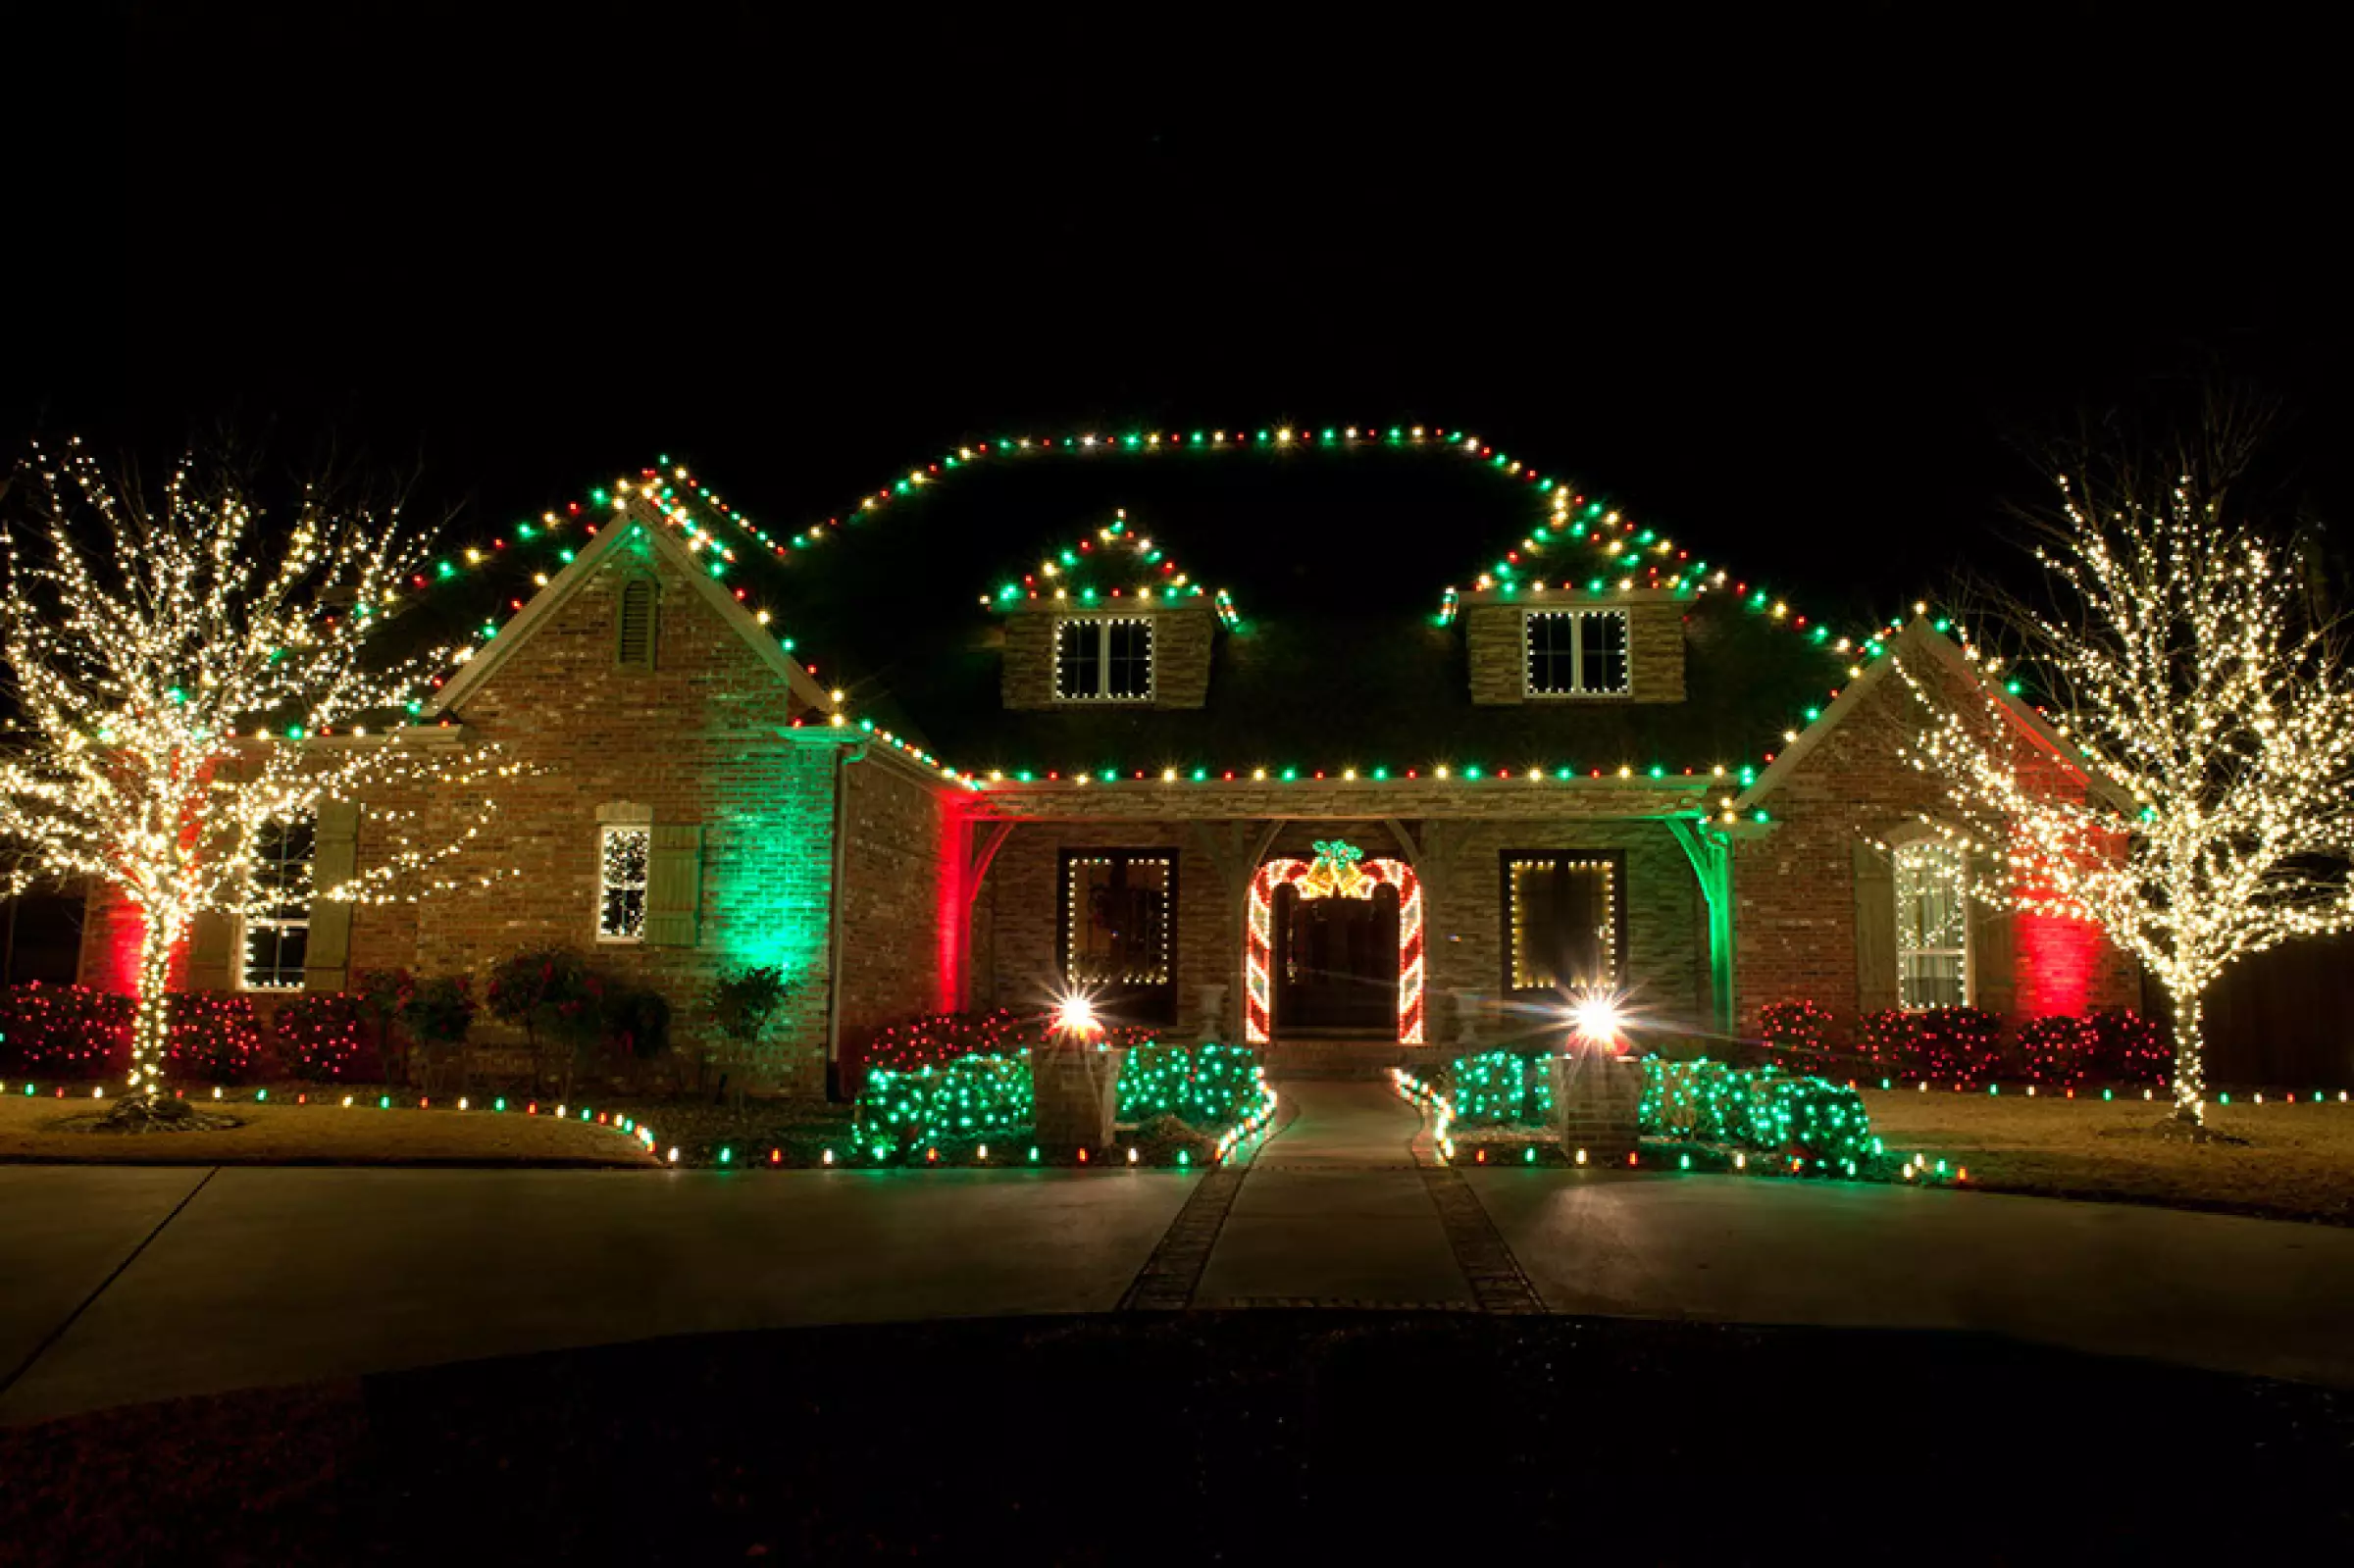 Go Big For Your Home With Holiday Dec